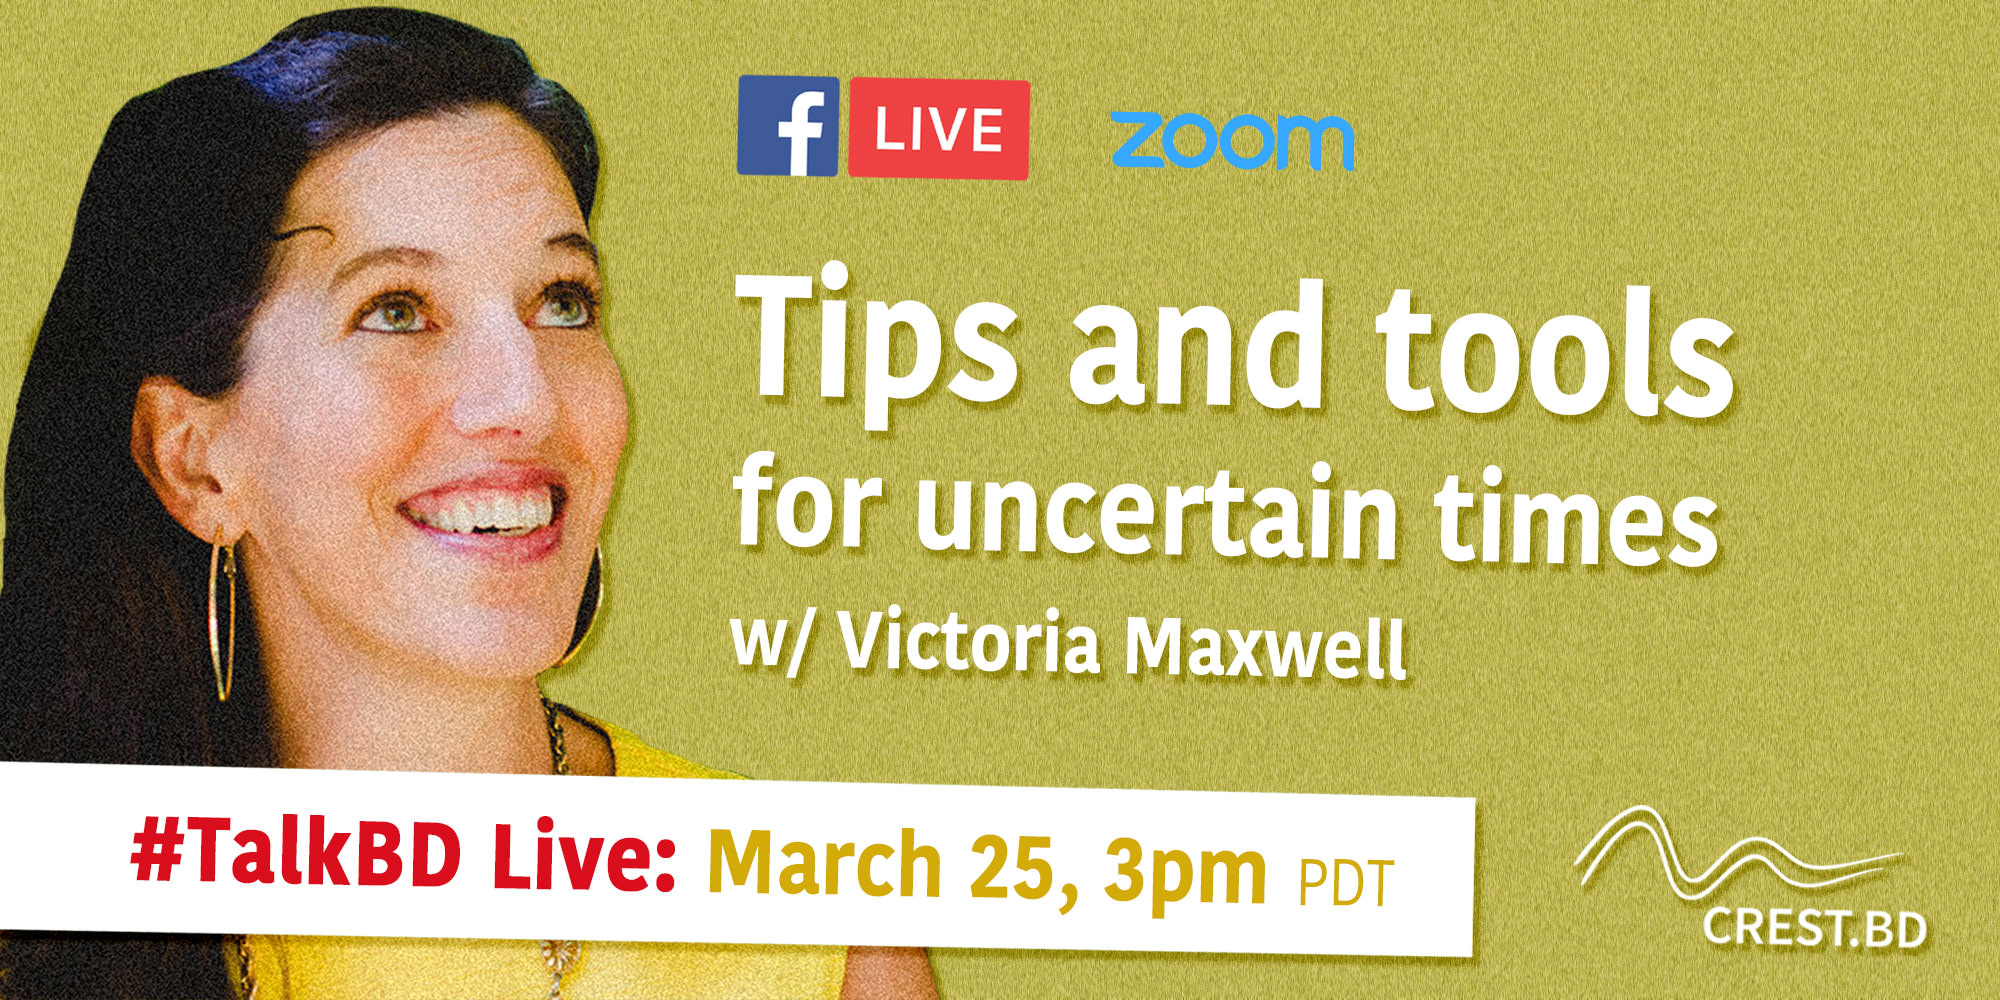 A banner for the first #TalkBD, featuring Victoria Maxwell. She is wearing a yellow shirt and hoop earrings, and is looking upwards and smiling. The background is a solid yellow-green colour. The banner says, 'Tips and Tools for Uncertain Times - #TalkBD Live - March 25th, 3pm PDT.' 